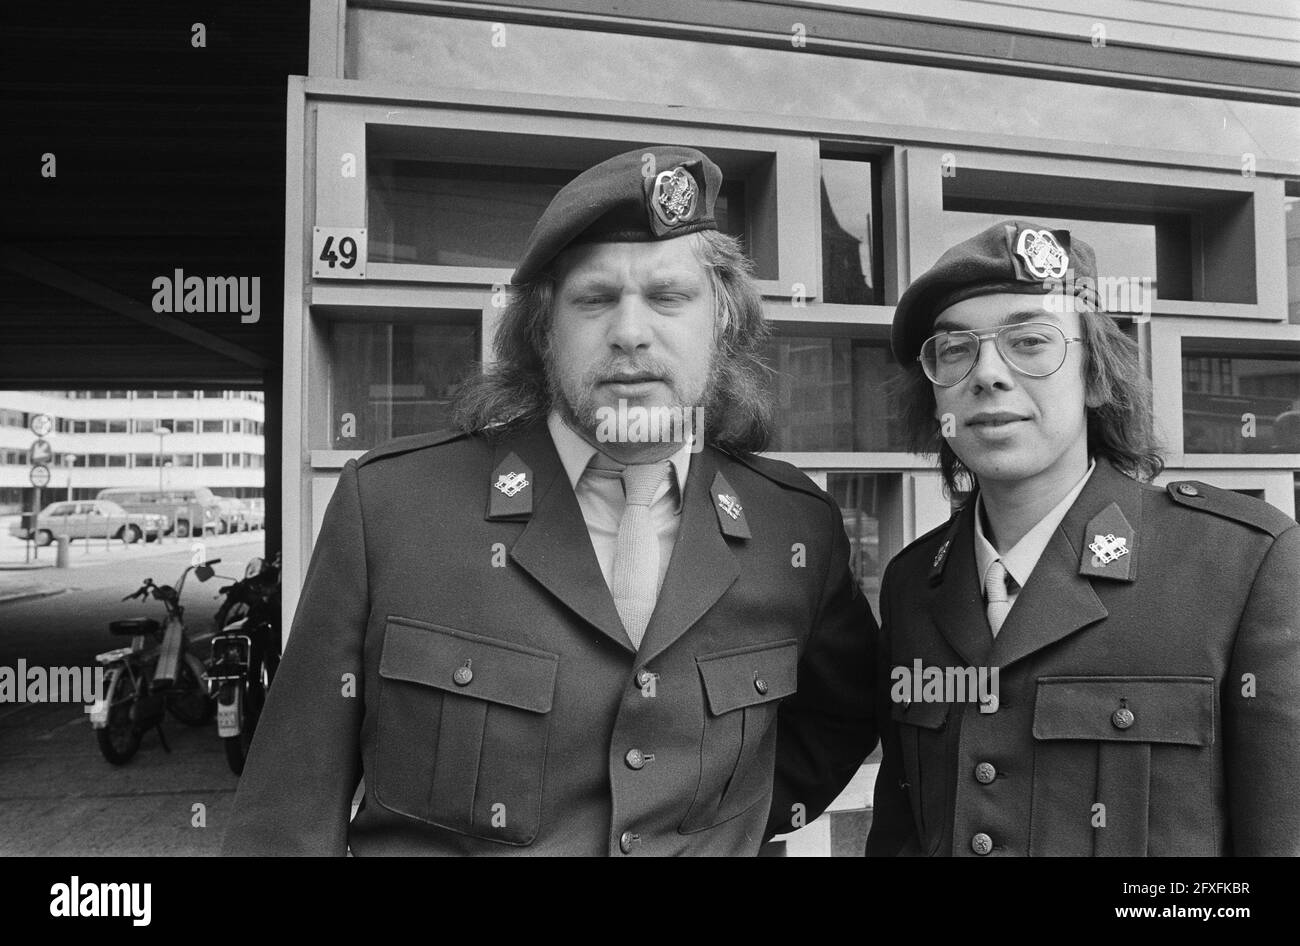 Two soldiers before court-martial Arnhem because of strike in Hohne ( West Germany ); no. 8 Nico Bruijstens (r) and Kees van Dijk (l), headlines, June 13, 1974, MILITARY, Strikes, The Netherlands, 20th century press agency photo, news to remember, documentary, historic photography 1945-1990, visual stories, human history of the Twentieth Century, capturing moments in time Stock Photo